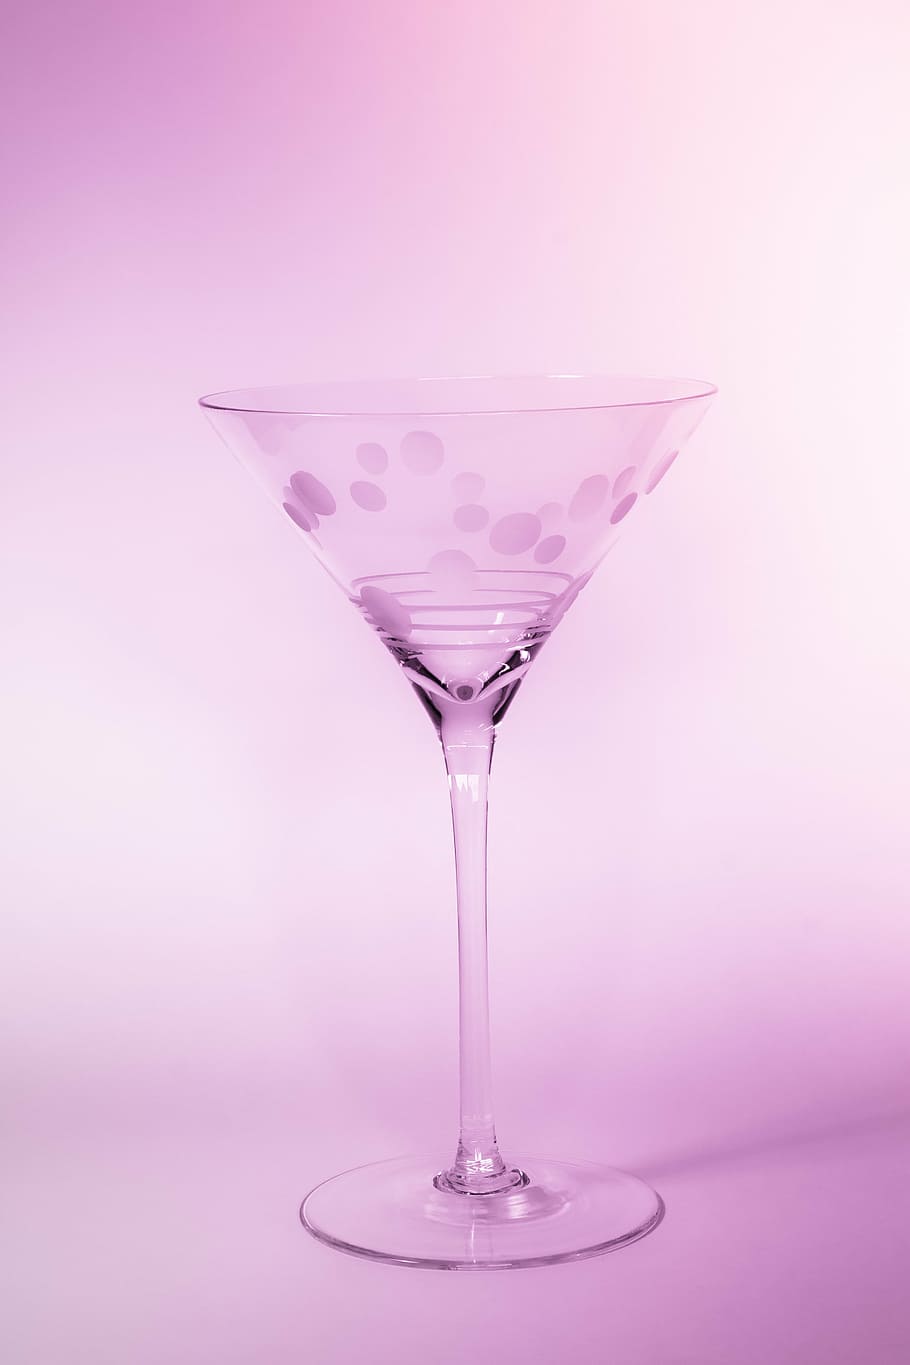 clear wine glass, glass, cocktail, pink, still life, drink, alcohol, martini, restaurant, cocktail glass